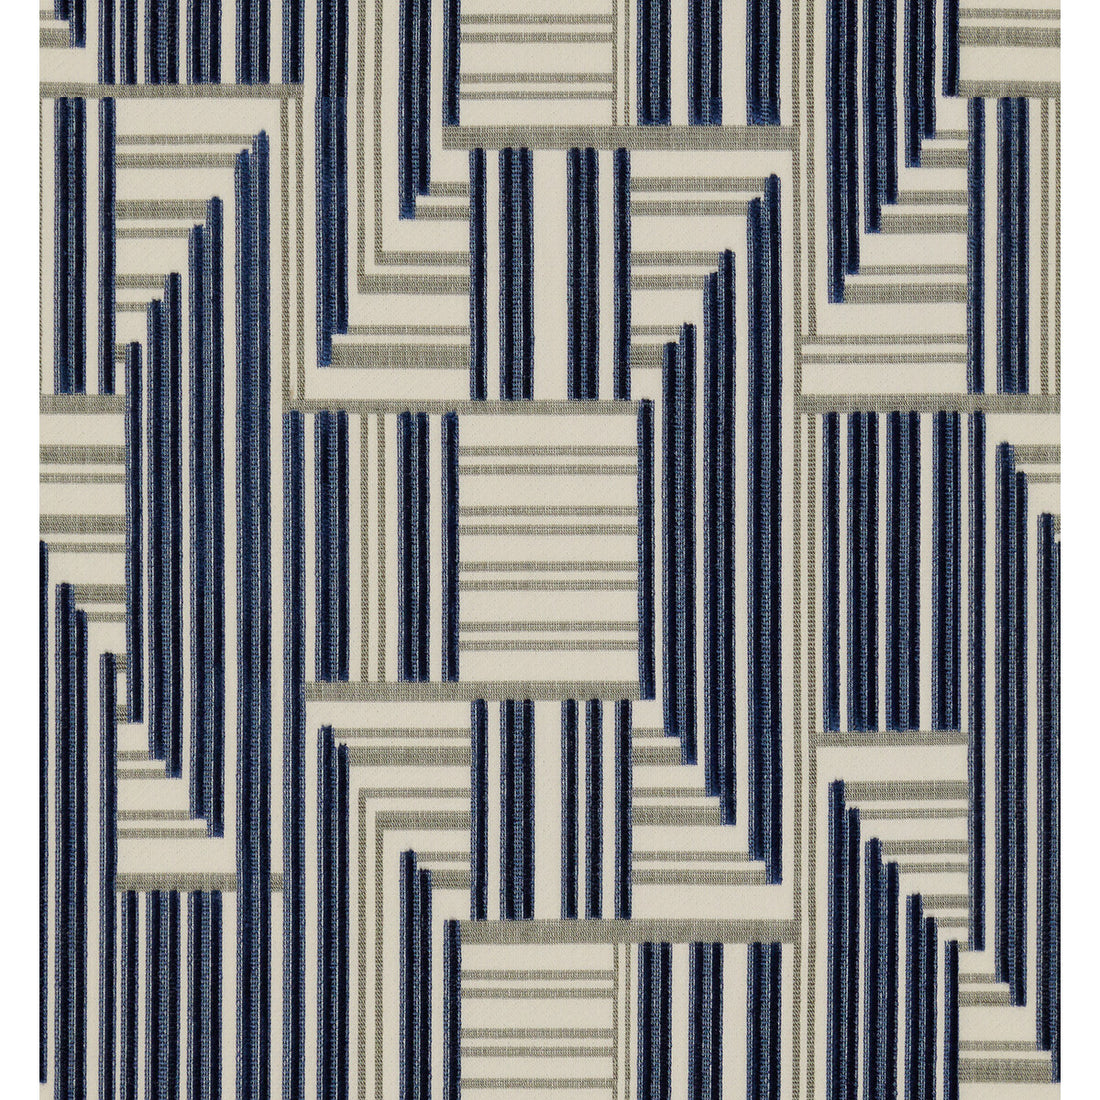 Cuboid Velvet fabric in navy/grey color - pattern GWF-3710.1150.0 - by Lee Jofa Modern in the Prism collection